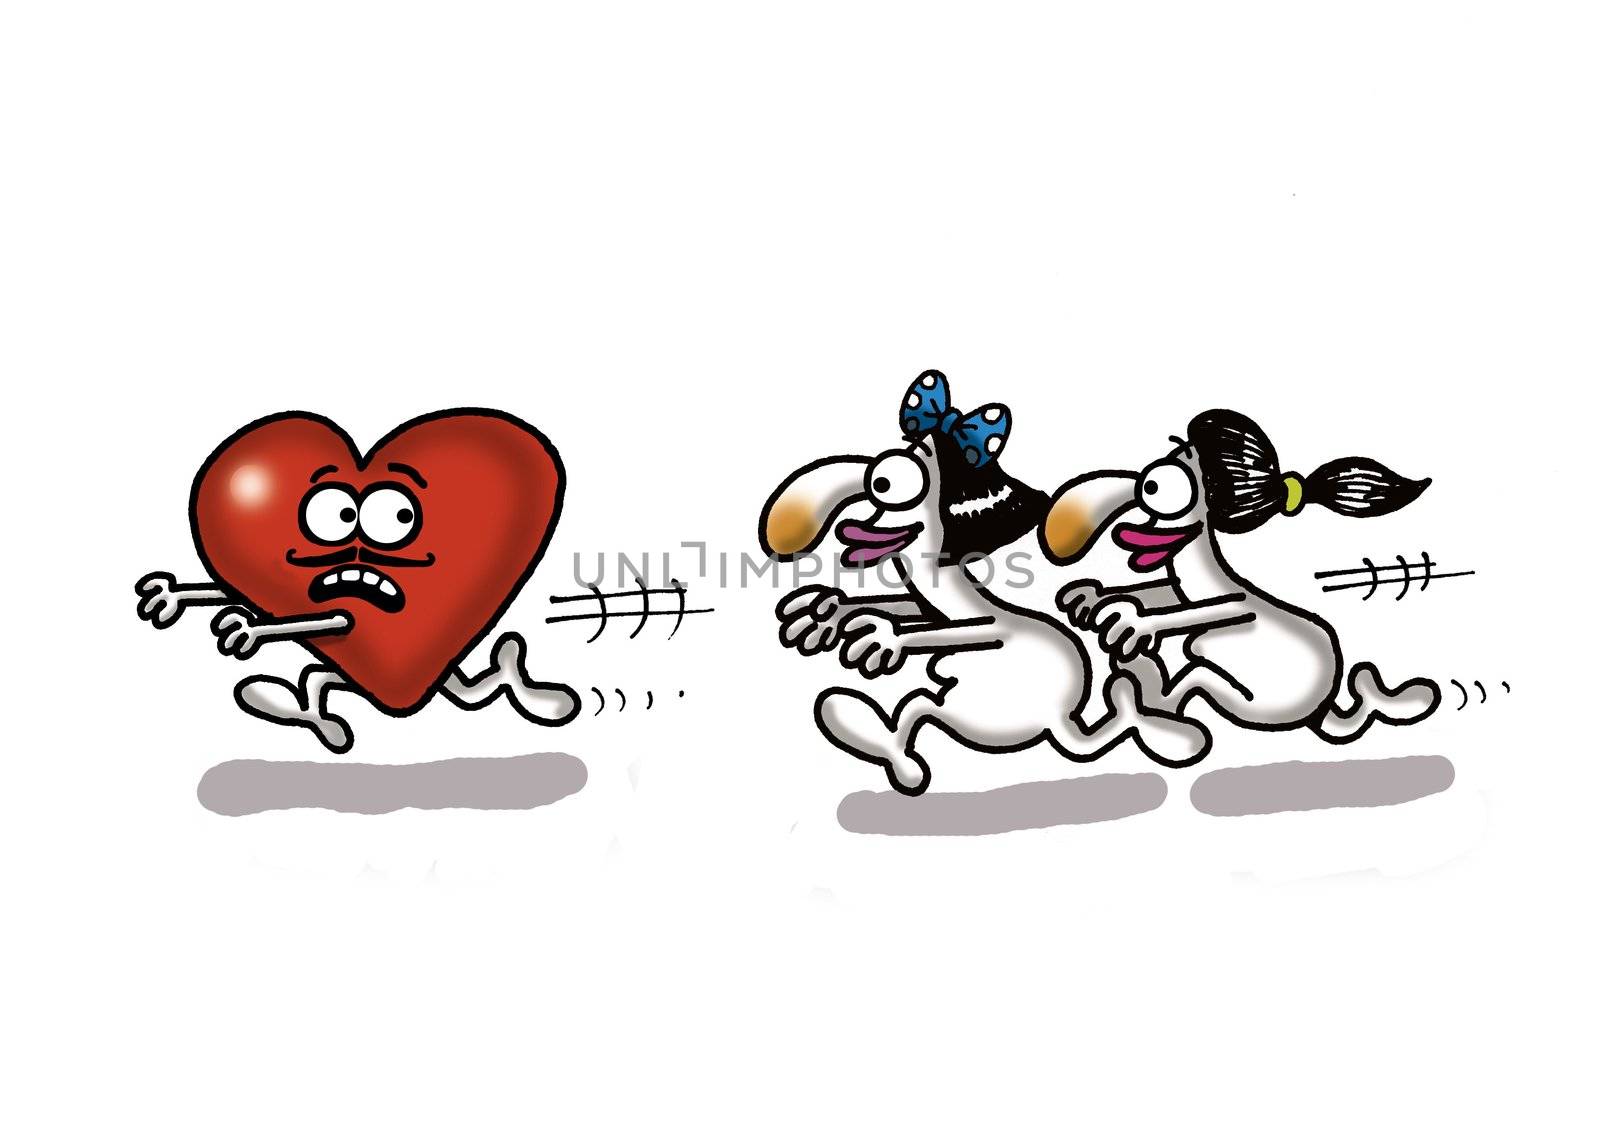 A humorous cartoon about Valentine's day and Love